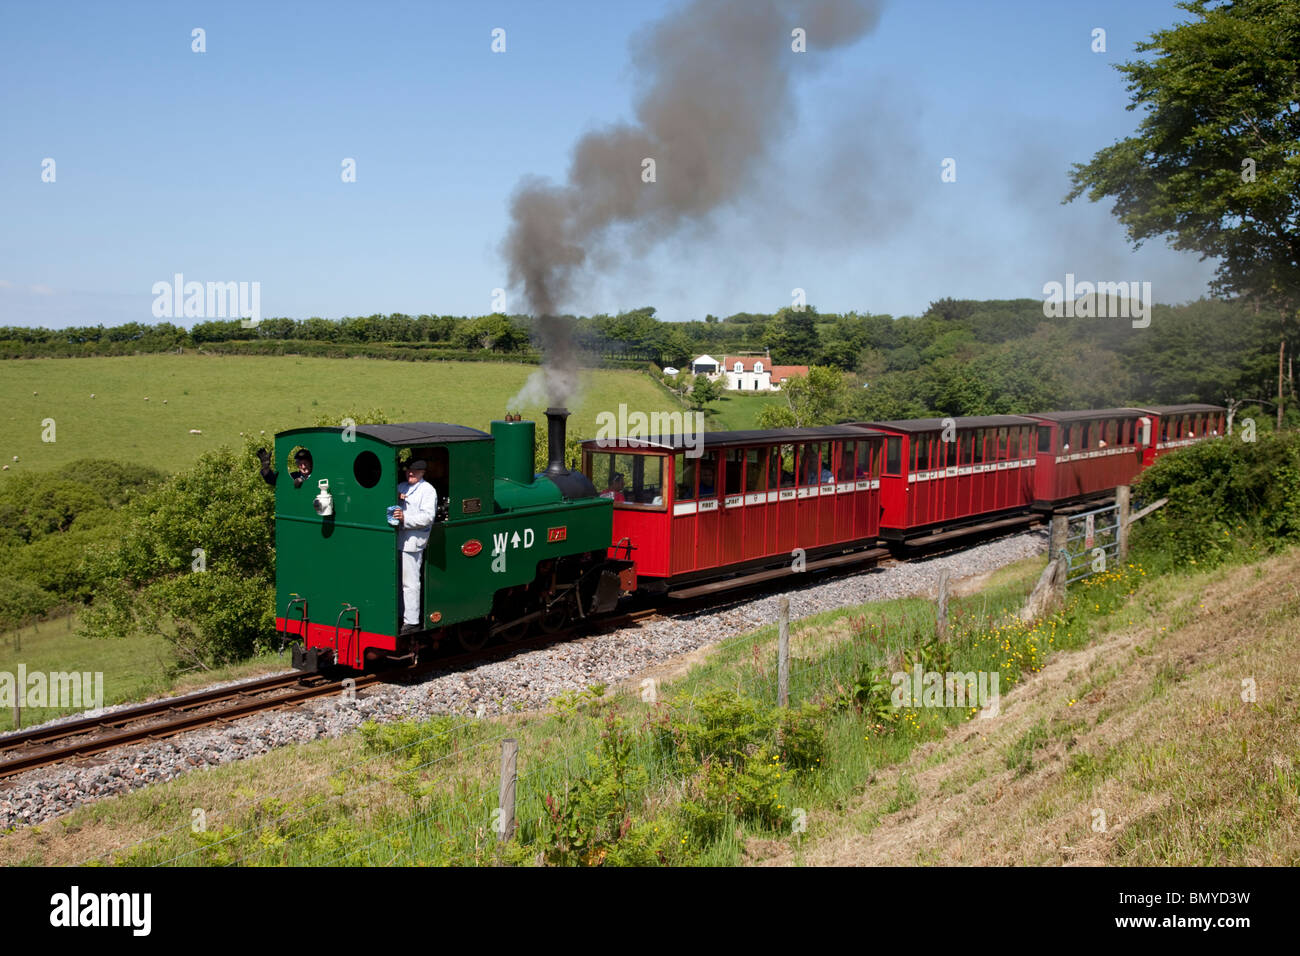 Steam train with red carriages Lynton & Barnstaple narrow gauge railway Woody Bay Station Parracombe Lynton North Devon UK Stock Photo